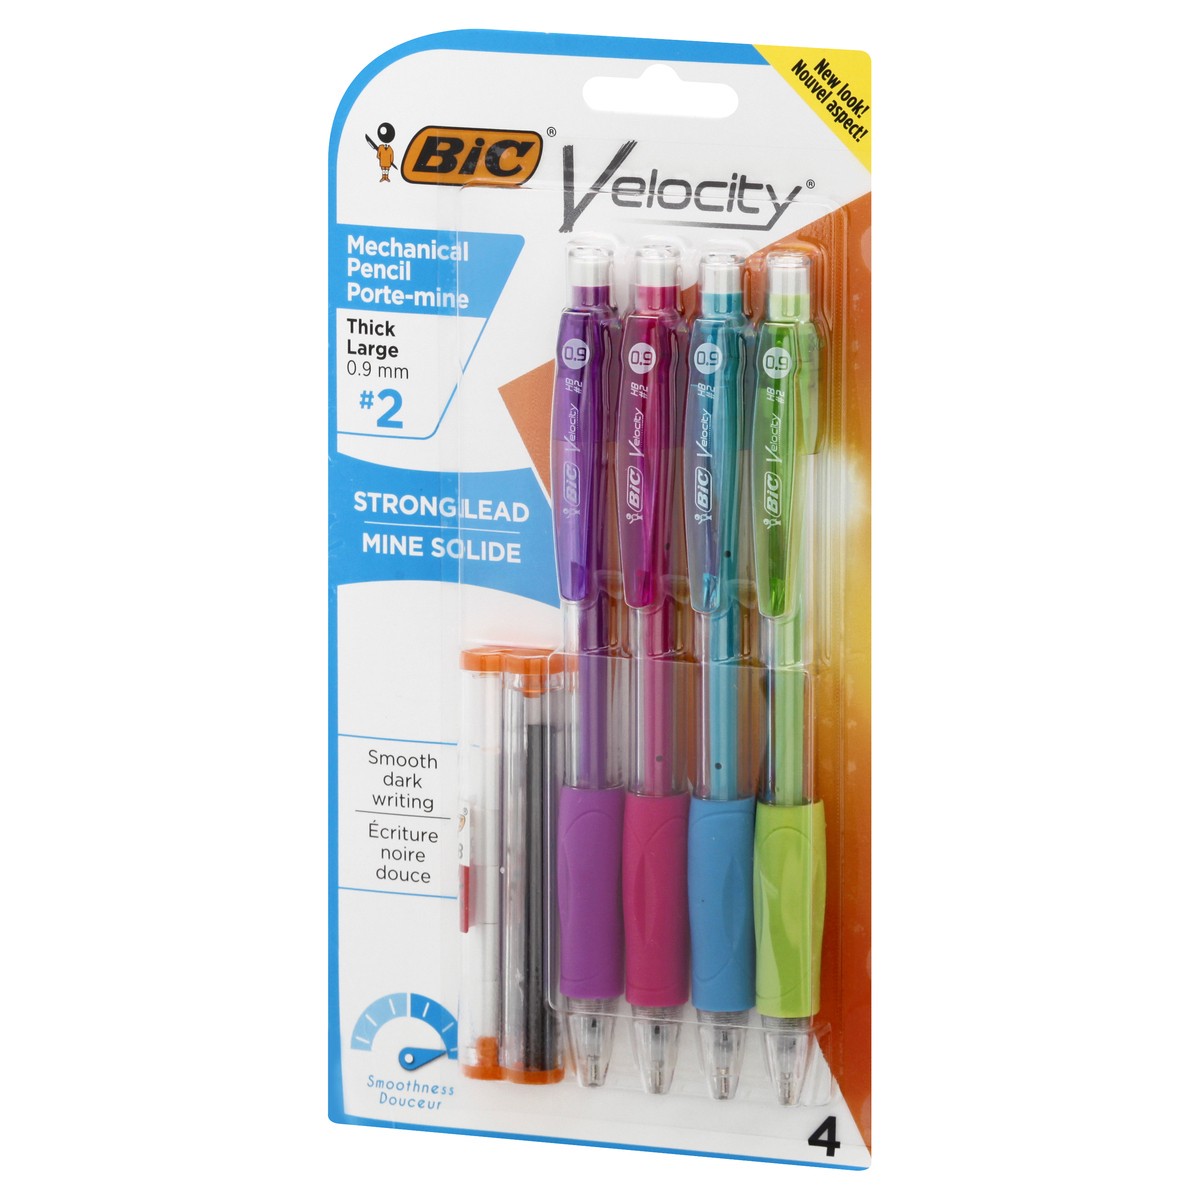 slide 4 of 9, BIC Velocity Thick Large (0.9 mm) No. 2 Strong Lead Mechanical Pencil 4 ea, 1 ct